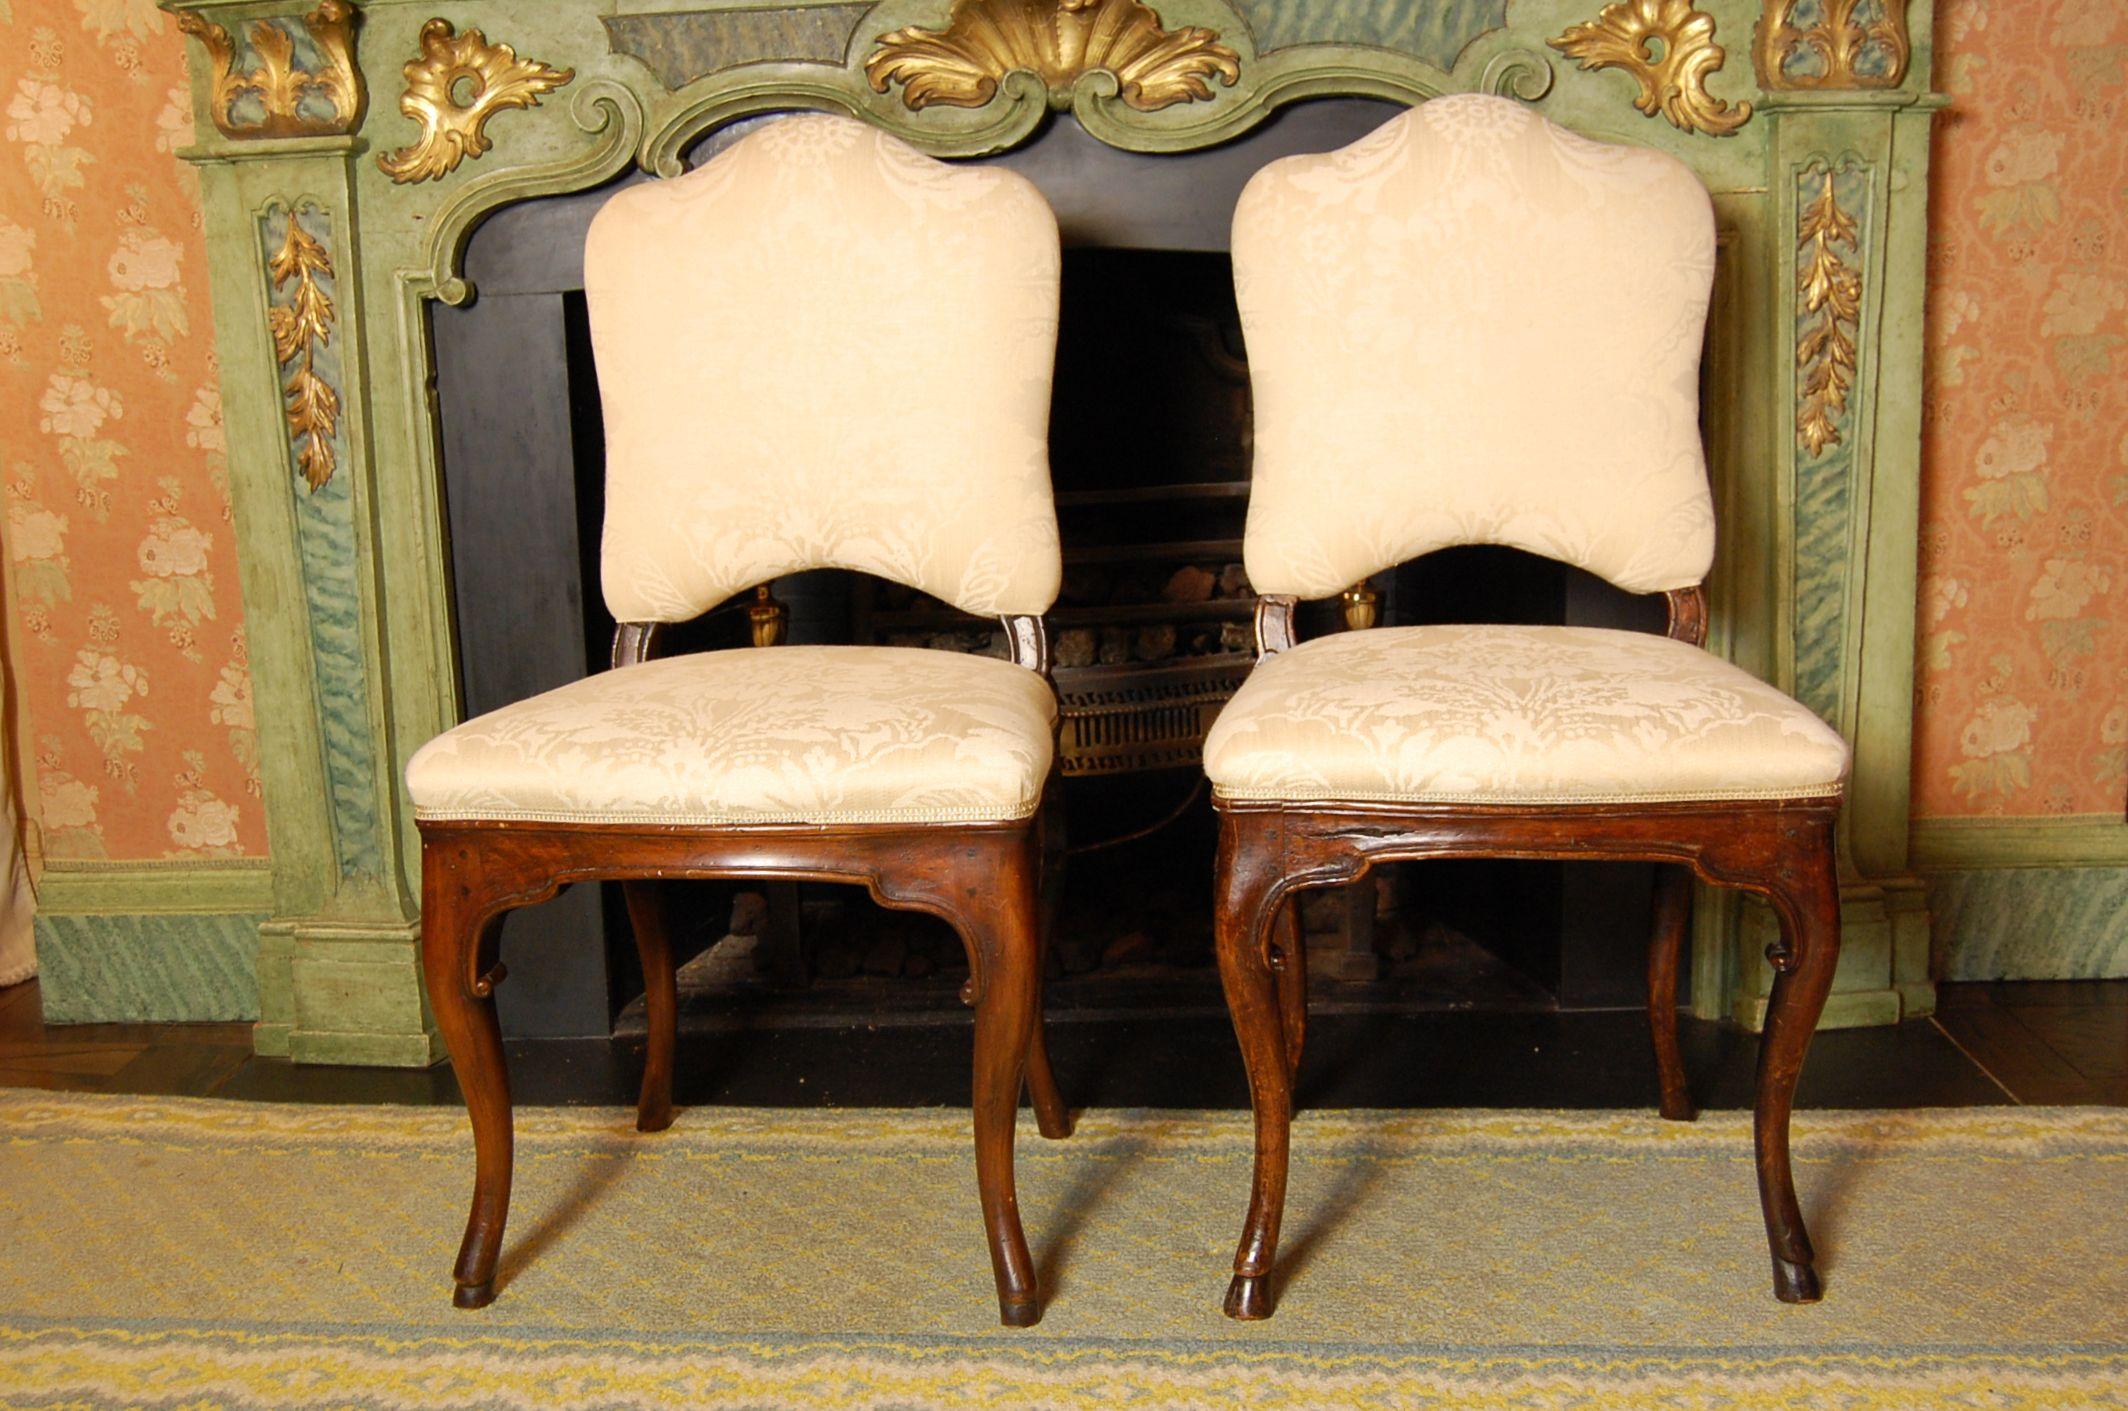 This is a set of six carved Walnut chairs, three of which are 19th century, the remaining three frames were custom-made to match the antique chairs in the late 1990s. Recently recovered in a tone on tone cotton damask. Originally owned by Pittsburgh